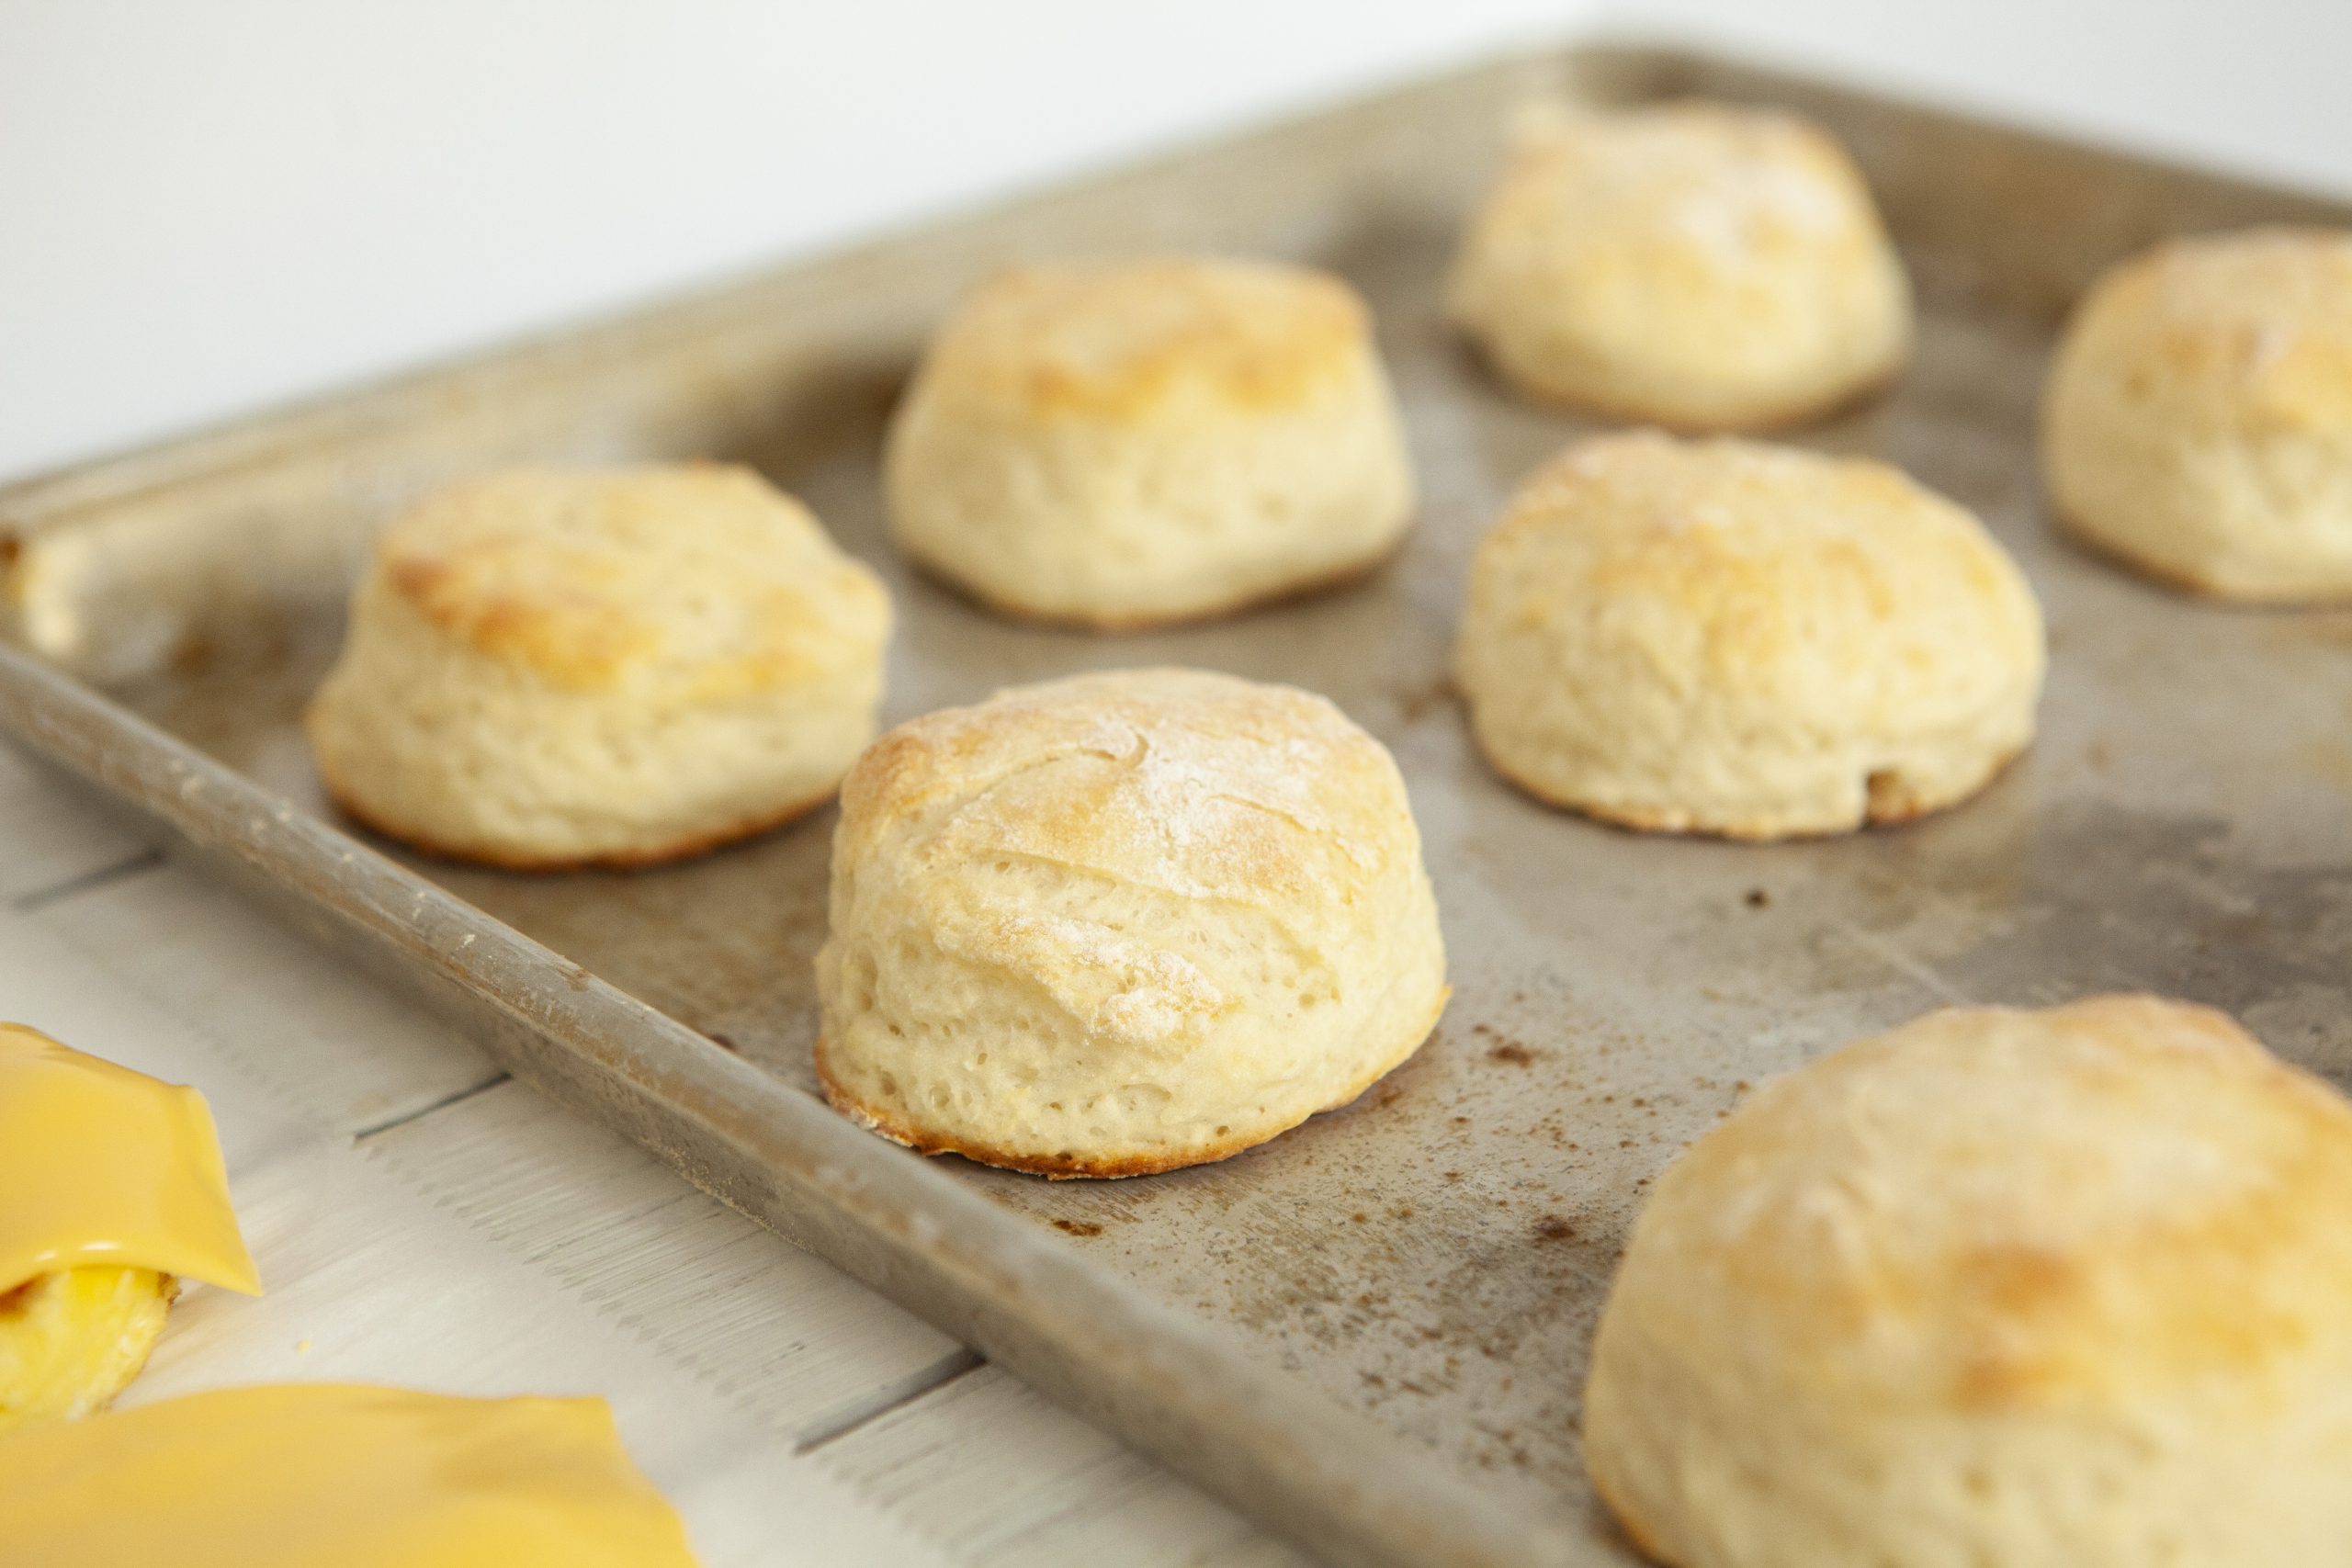 biscuits on a tray